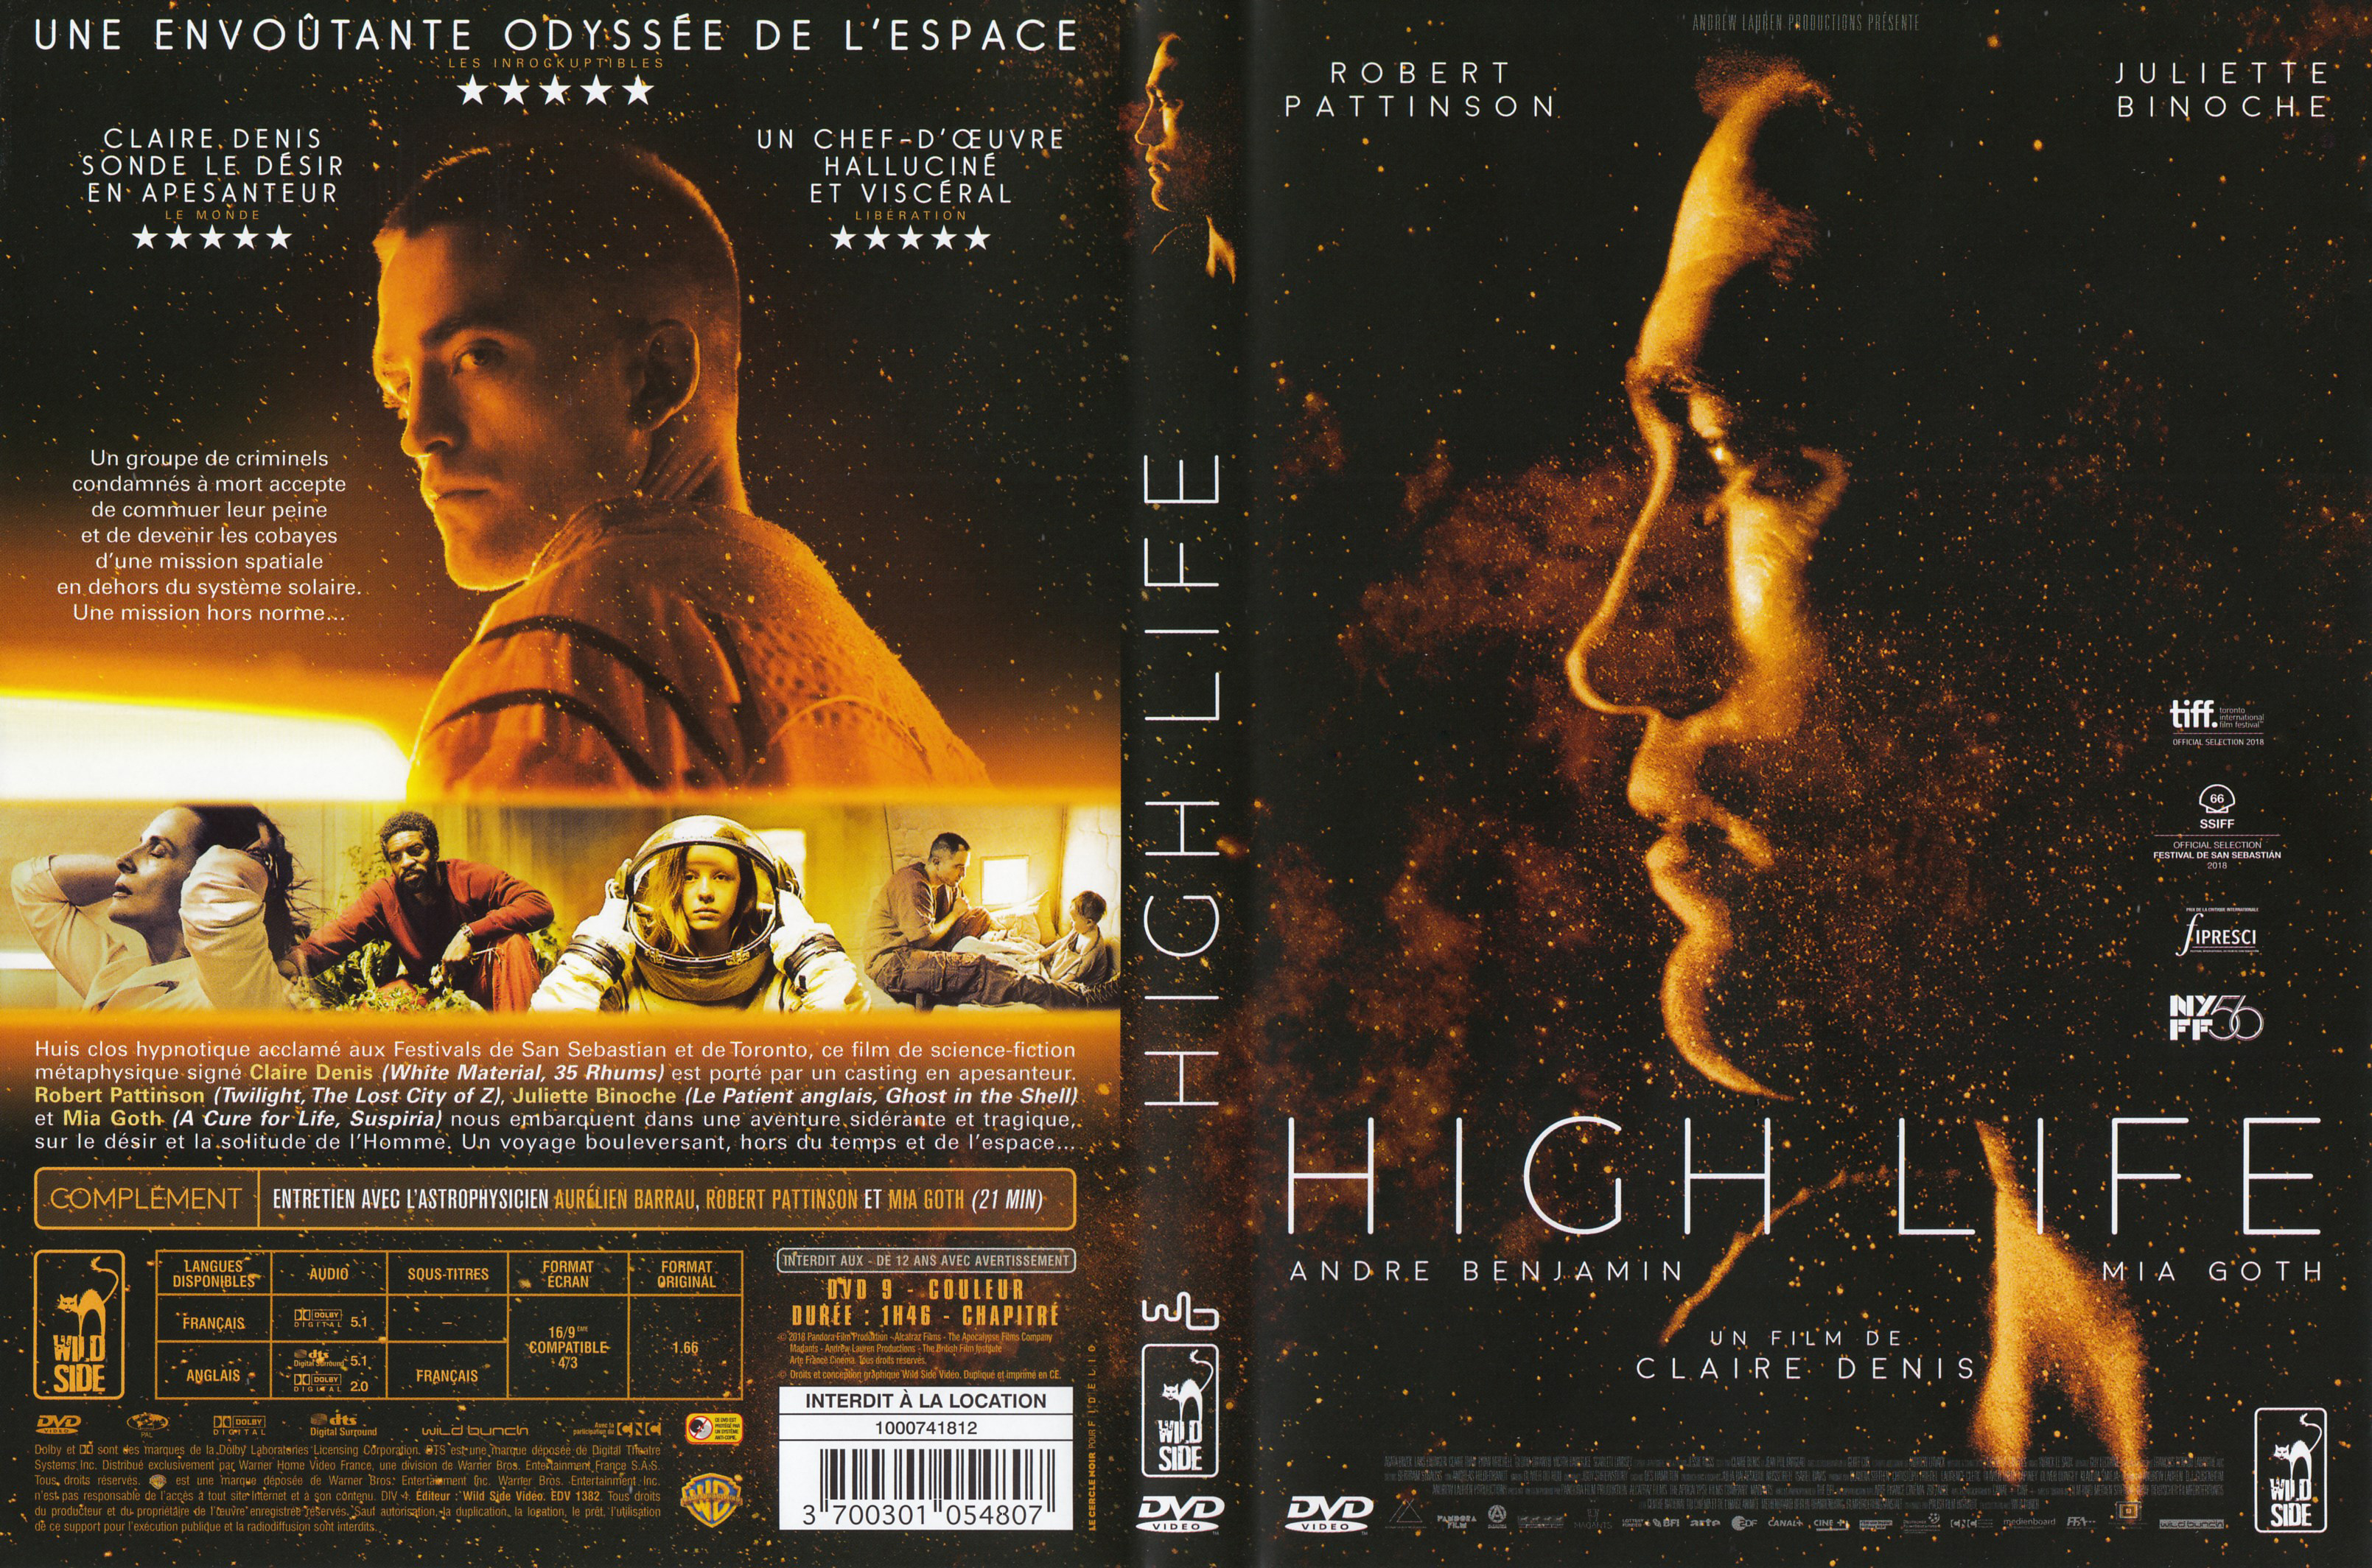 Jaquette DVD High life